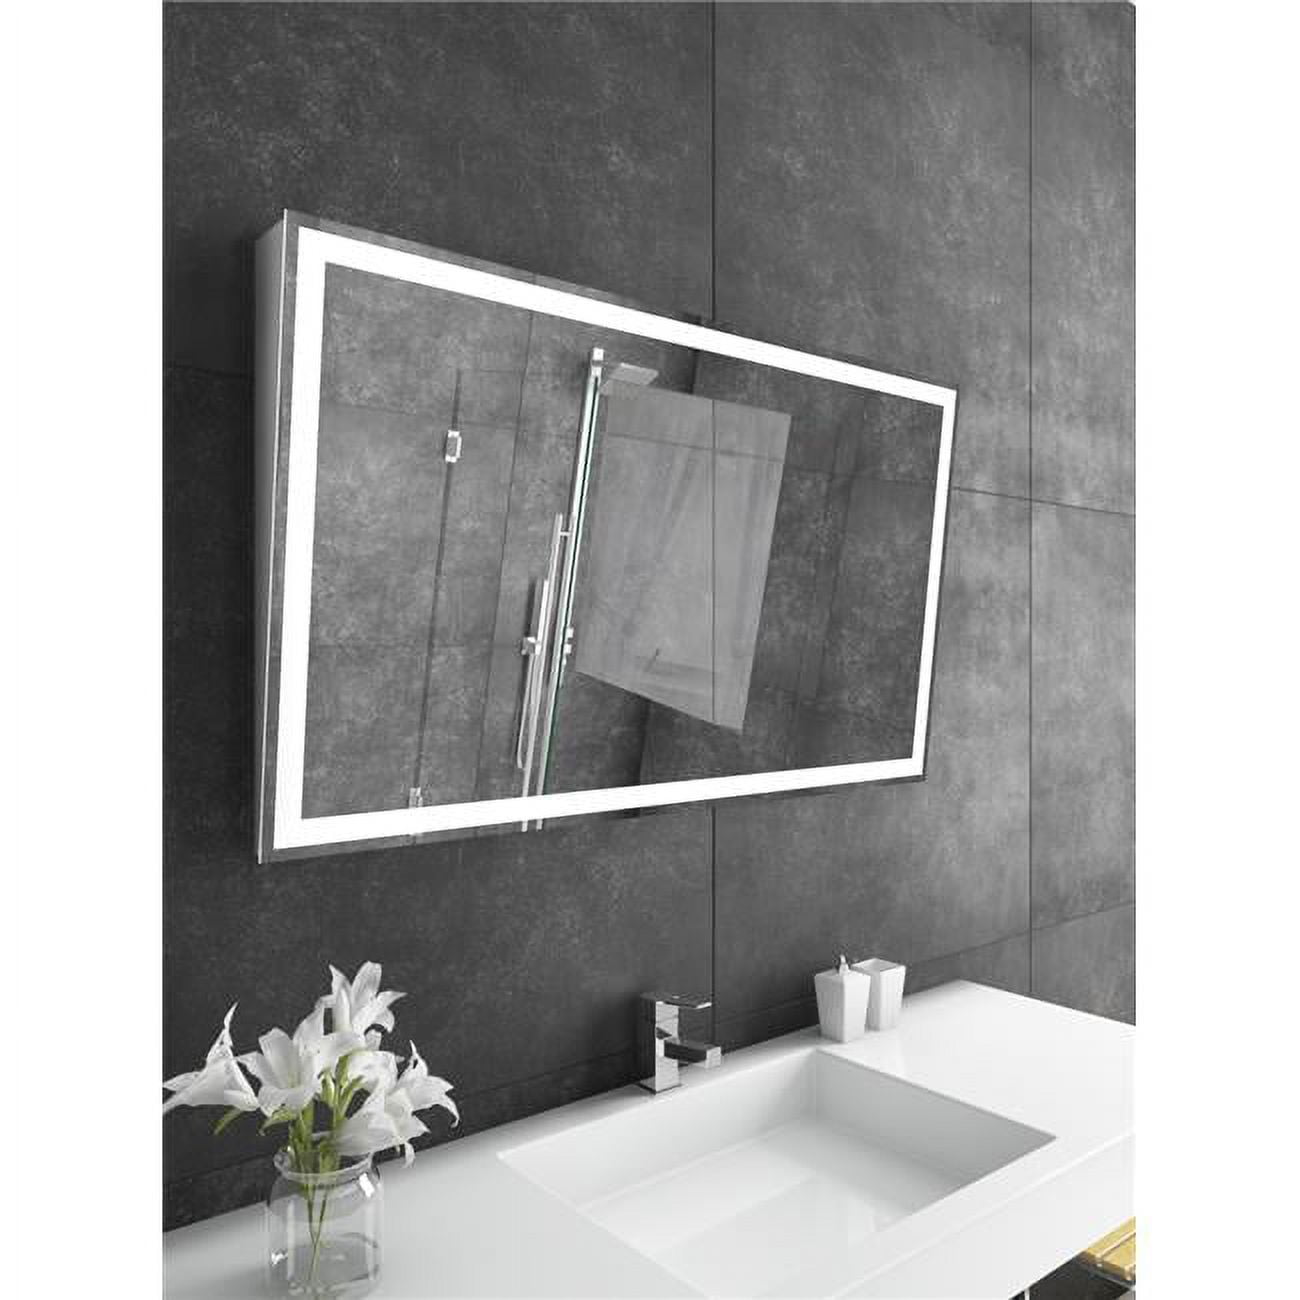 Kids Safe Unbreakable Mirror Extra Thick1/8 8x8,Acrylic Mirrors,  Non-Glass Body Mirror Home Gym Mirrors Full Length Wall - On Sale - Bed  Bath & Beyond - 37263344